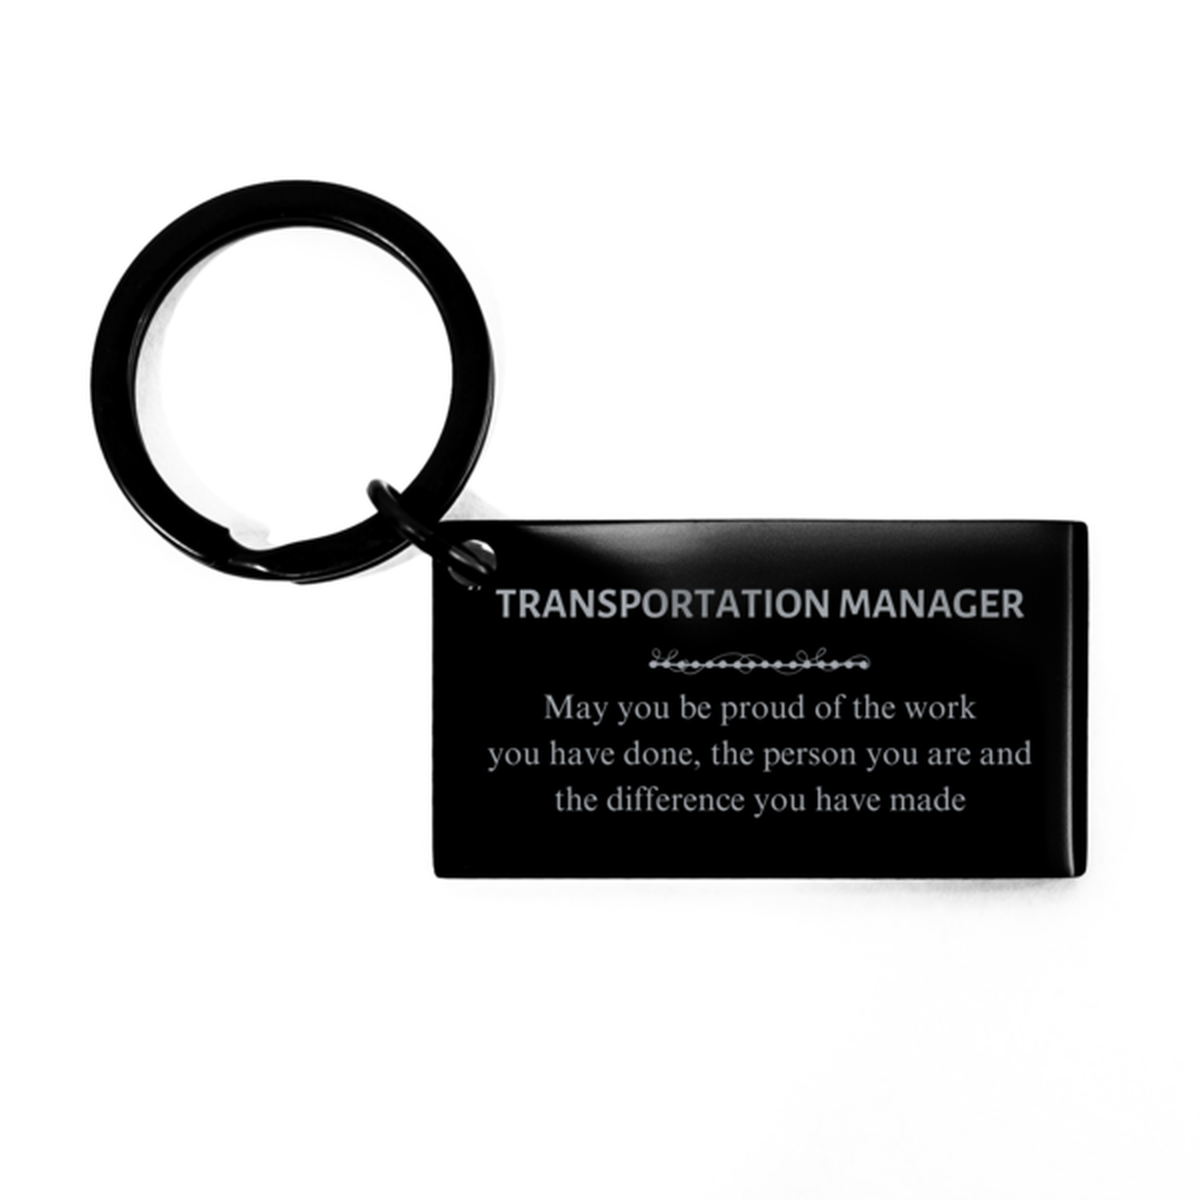 Actuary May you be proud of the work you have done, Retirement Transportation Manager Keychain for Colleague Appreciation Gifts Amazing for Transportation Manager